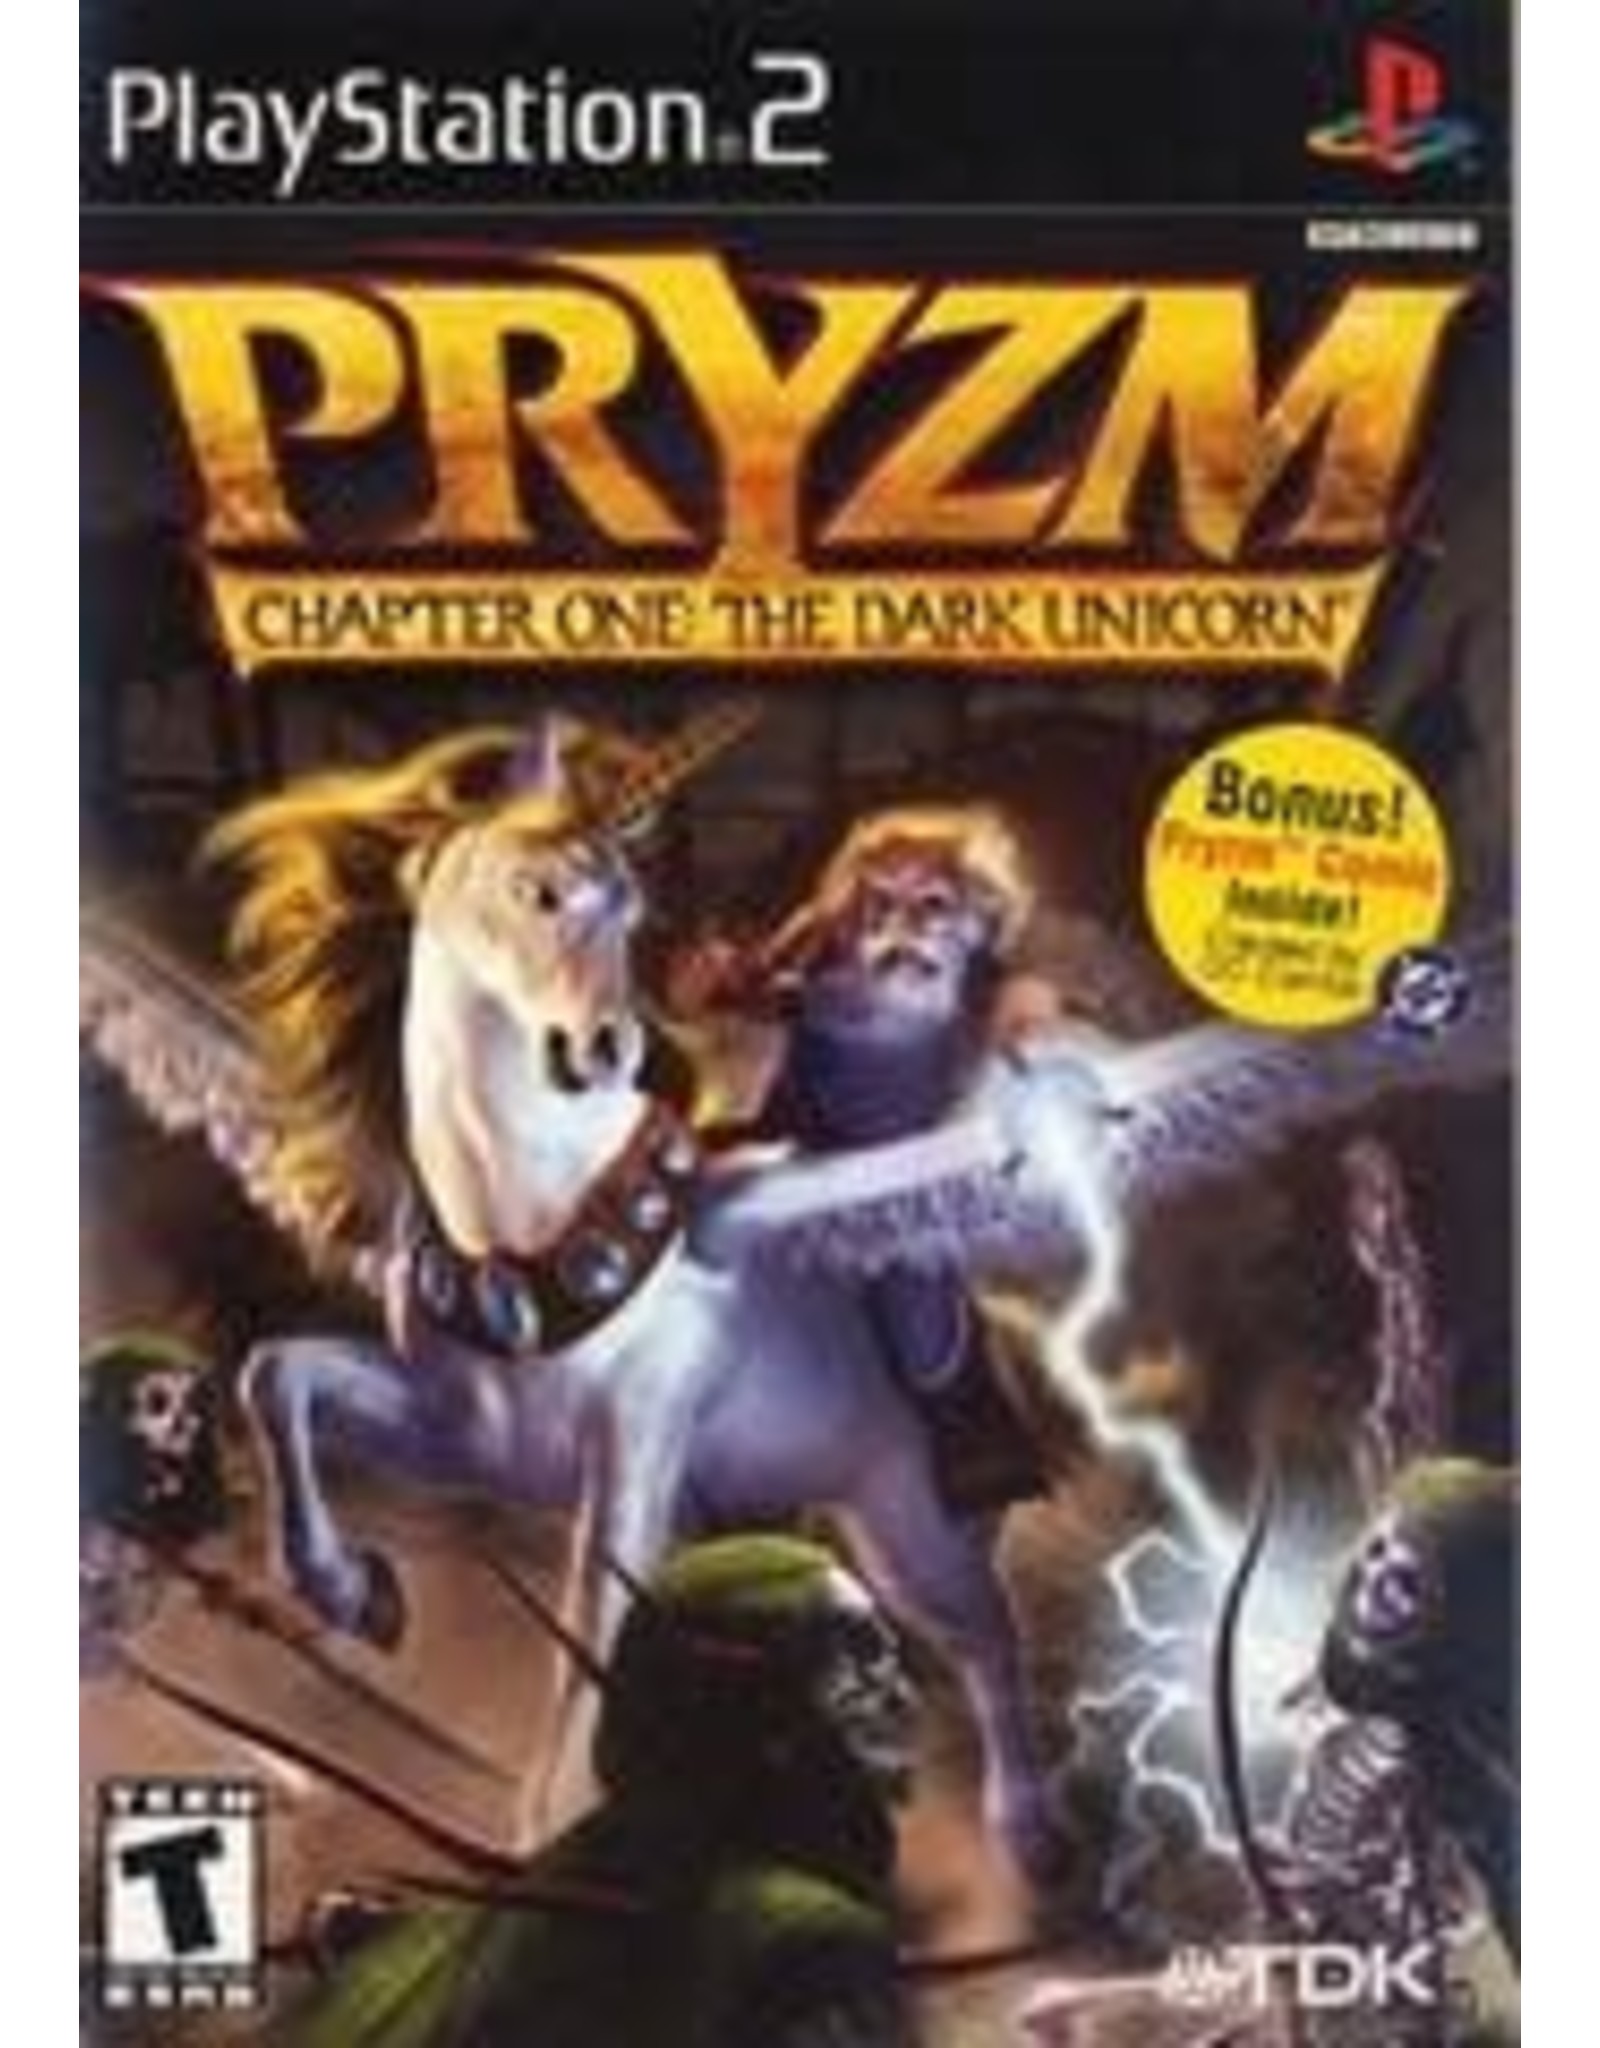 Playstation 2 Pryzm Chapter One The Dark Unicorn (No Manual or Comic)